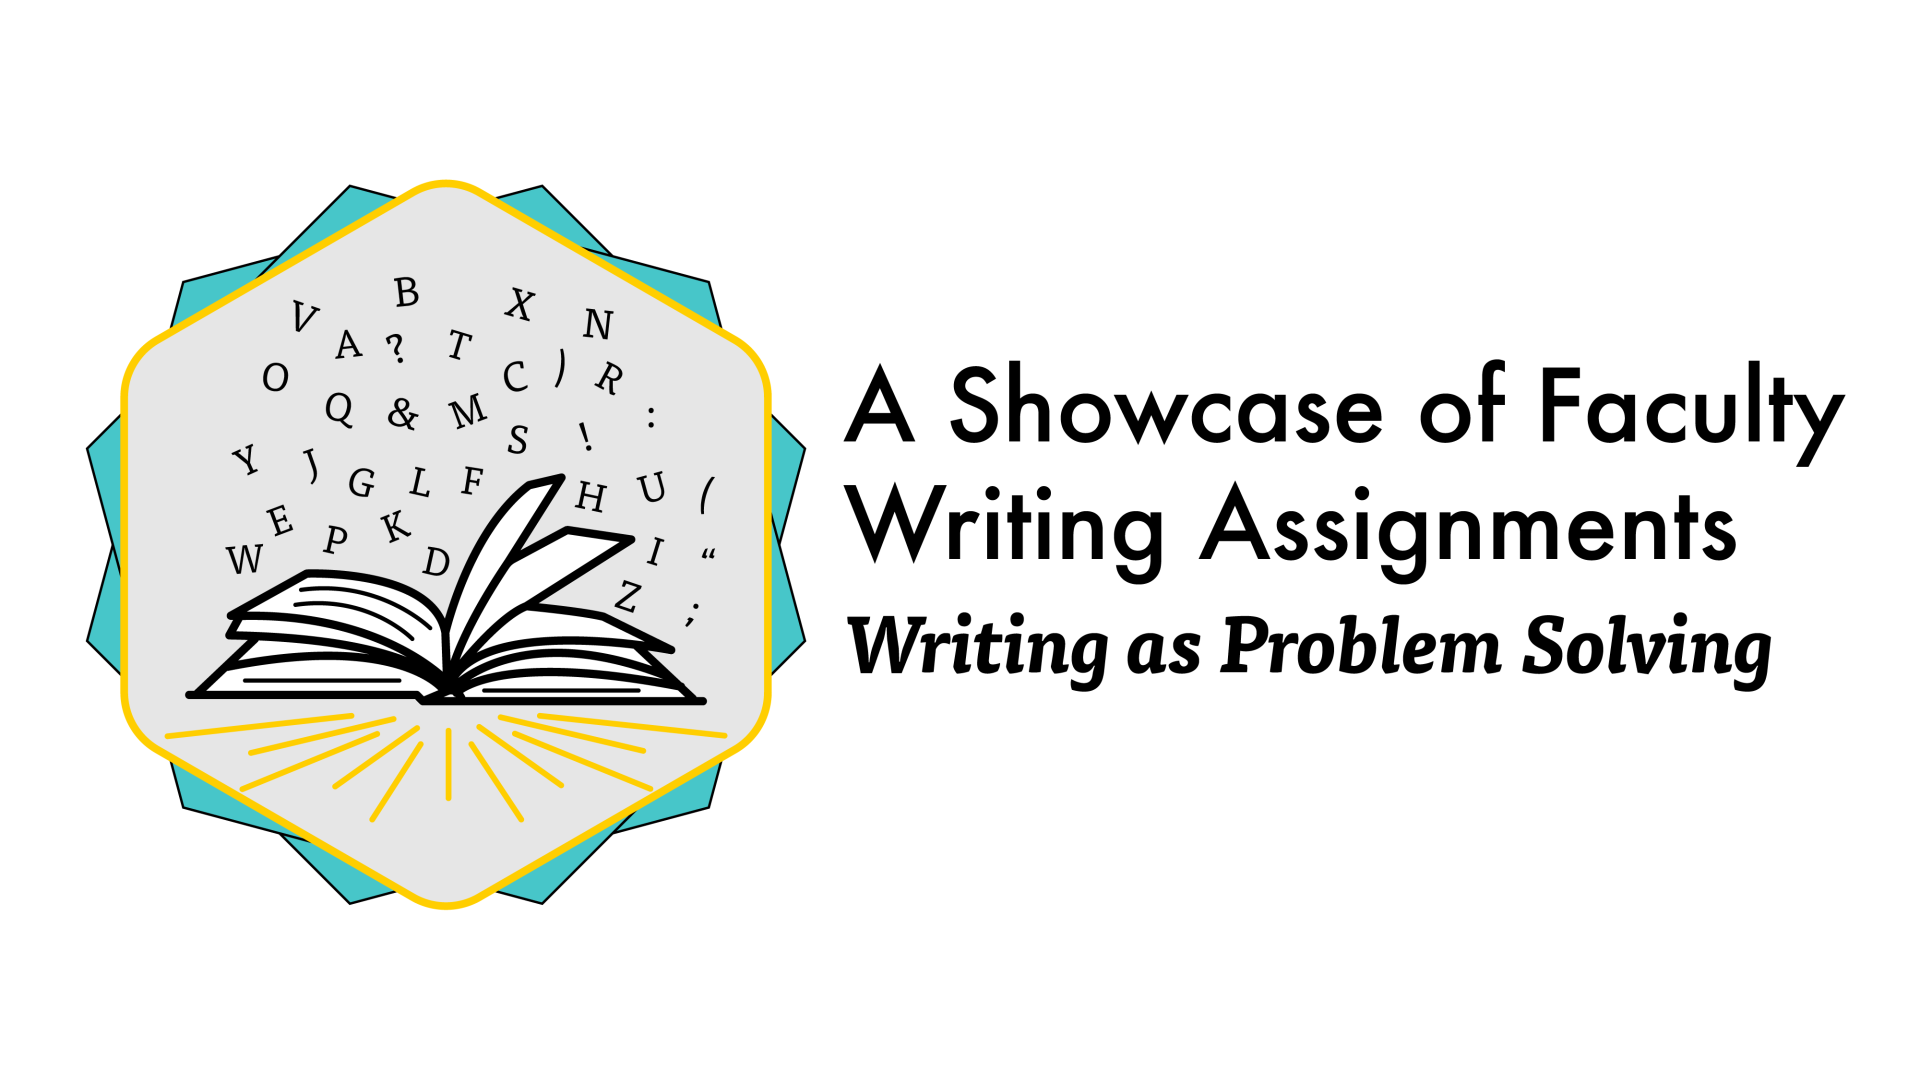 A Showcase of Faculty Writing Assignments: Writing as Problem Solving